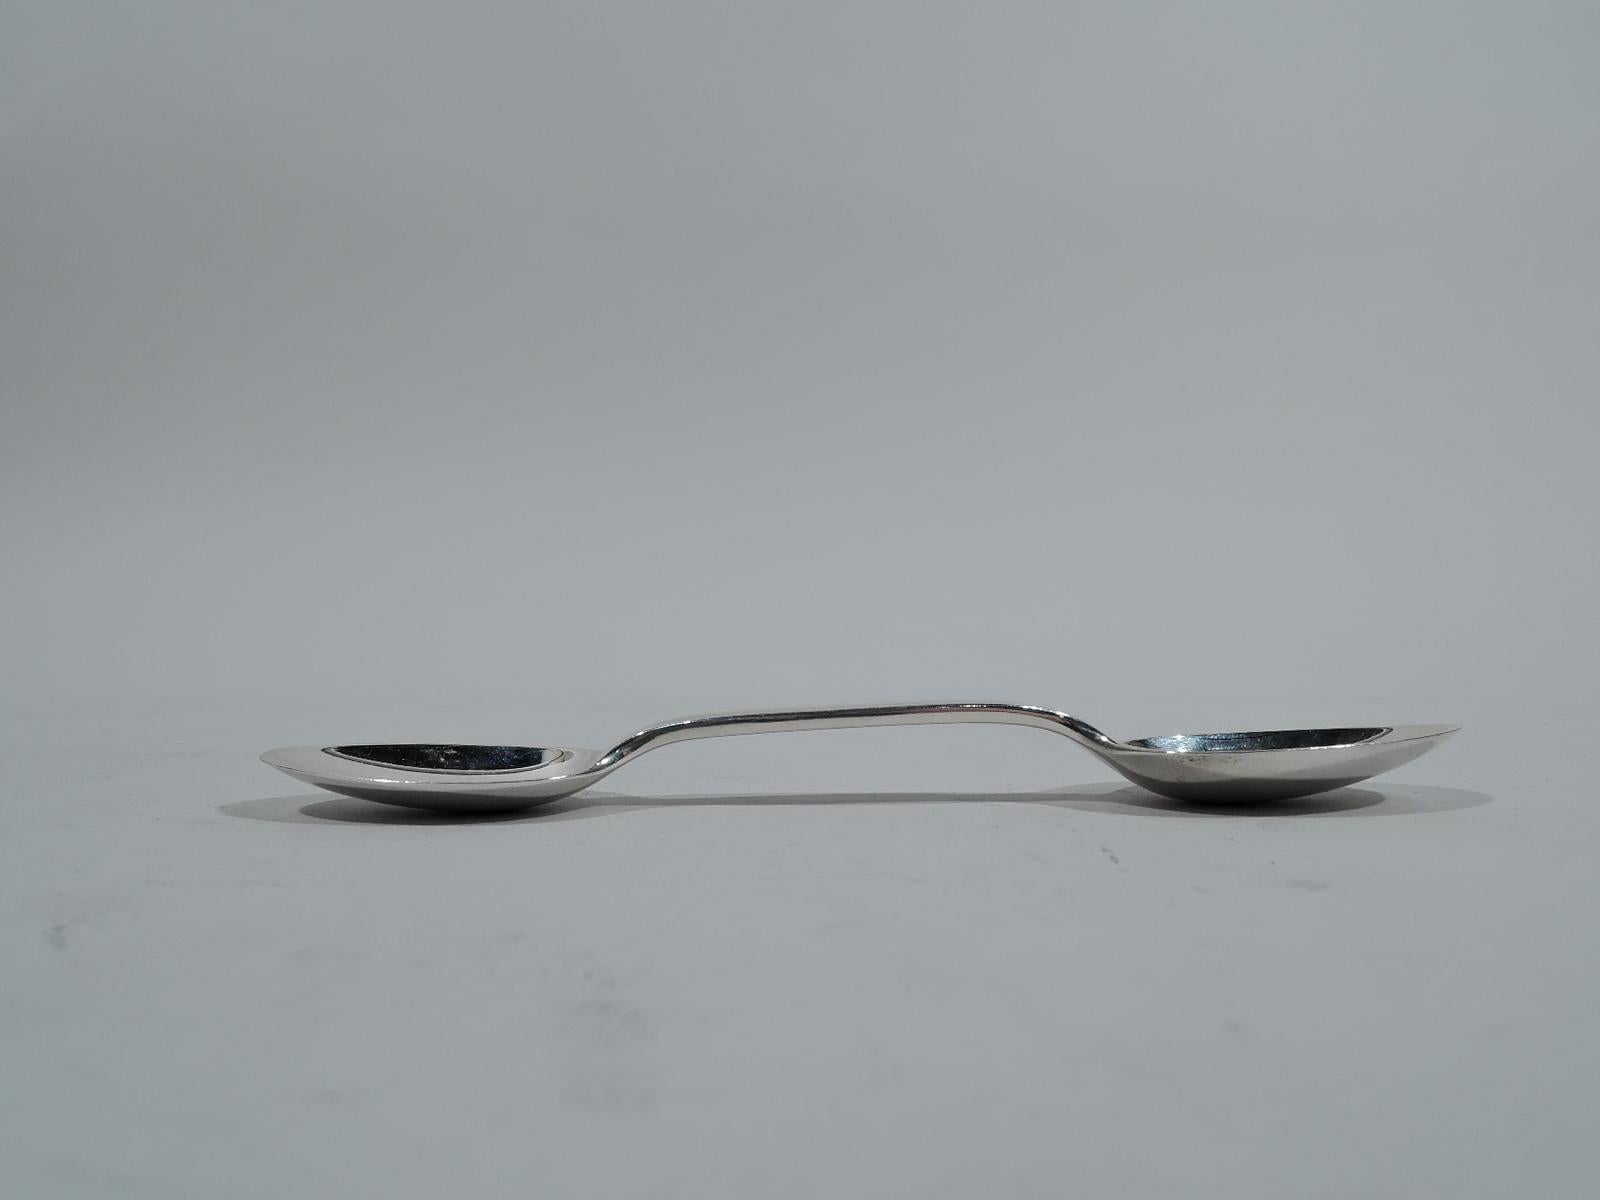 Traditional sterling silver medicine spoon. Made by Tiffany & Co. in New York, circa 1920. Large and small bowls joined by gently curved stems. Sizes are approximately teaspoon and half teaspoon. Convenient for home dosing. Fully marked including